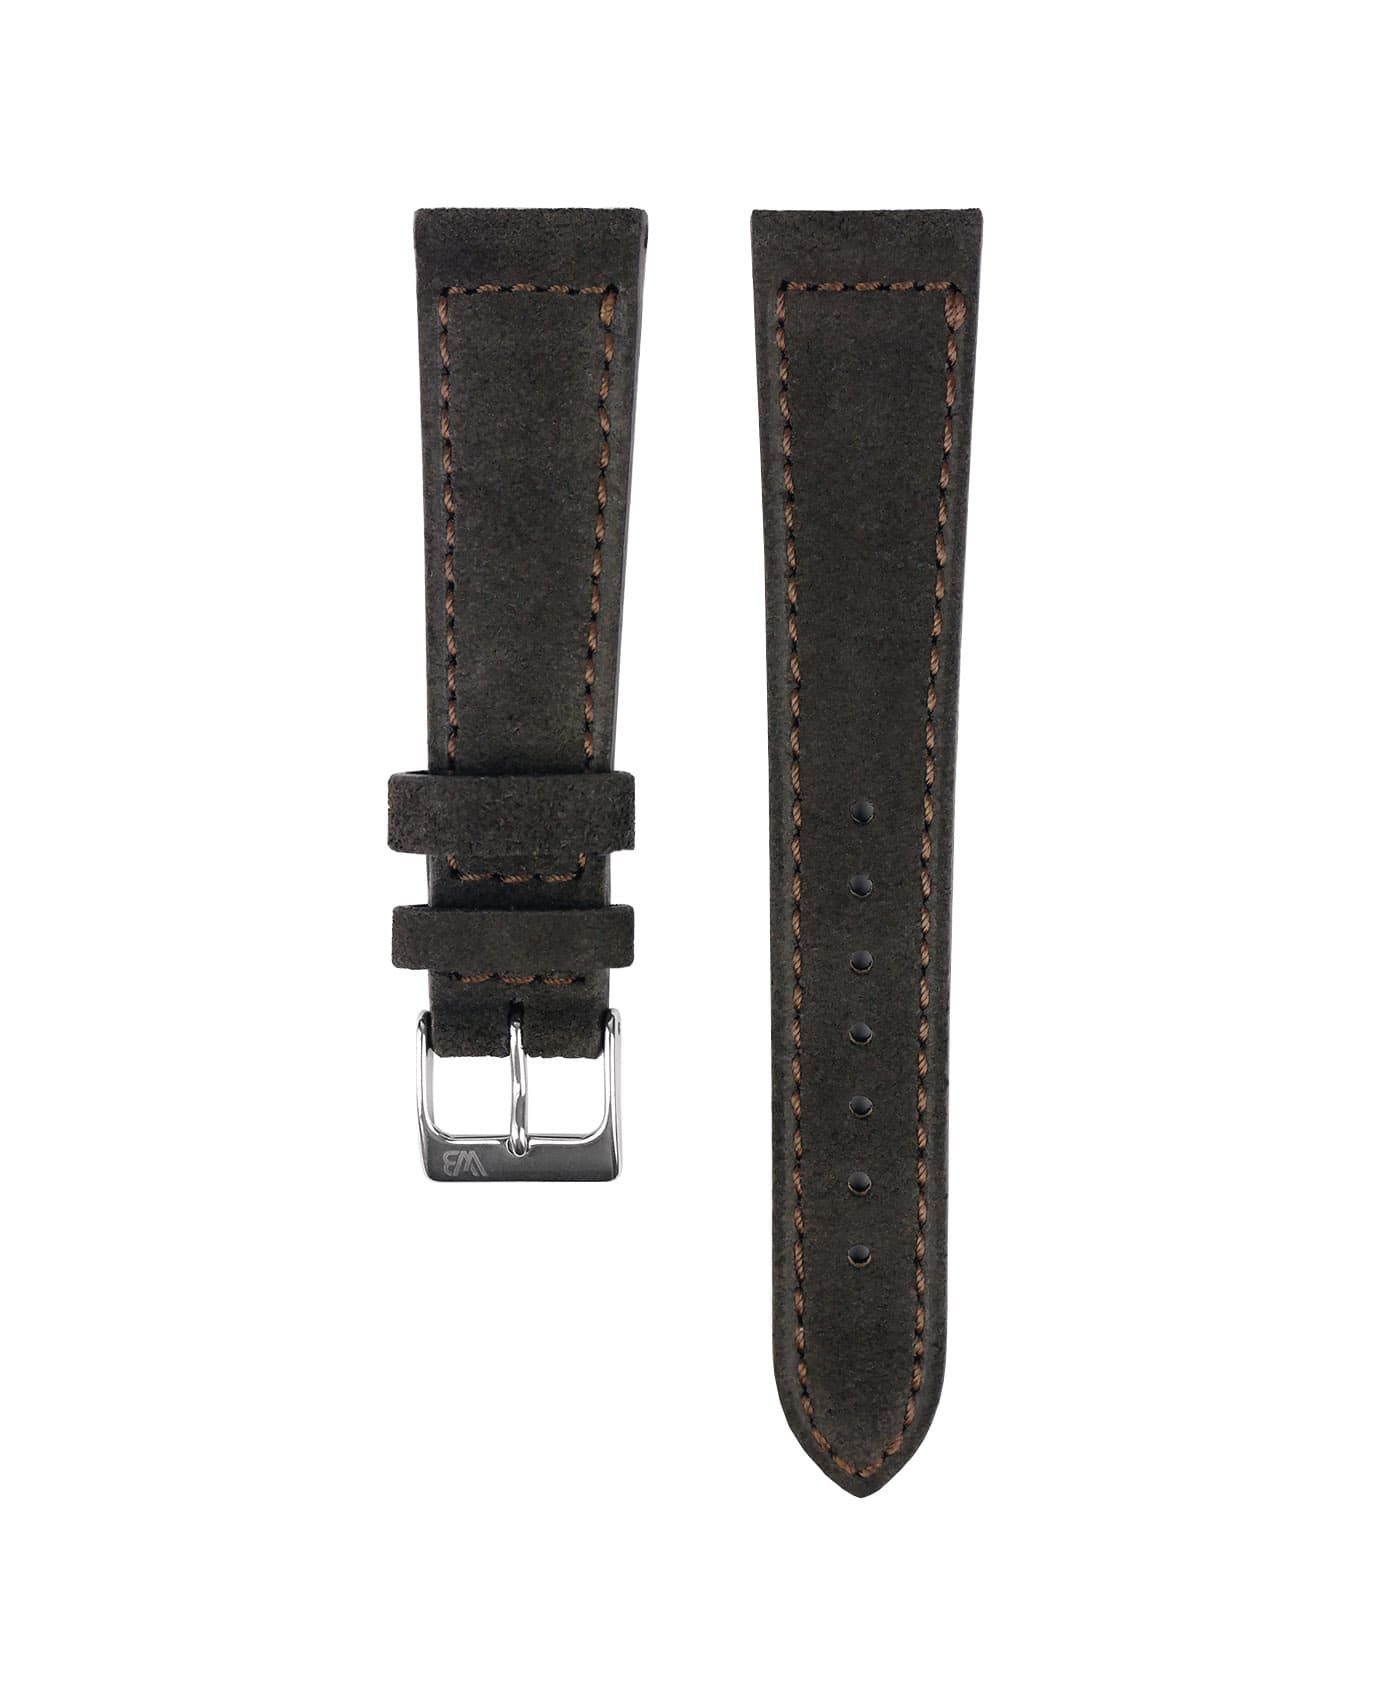 Suede leather strap with side seam_dark brown_front